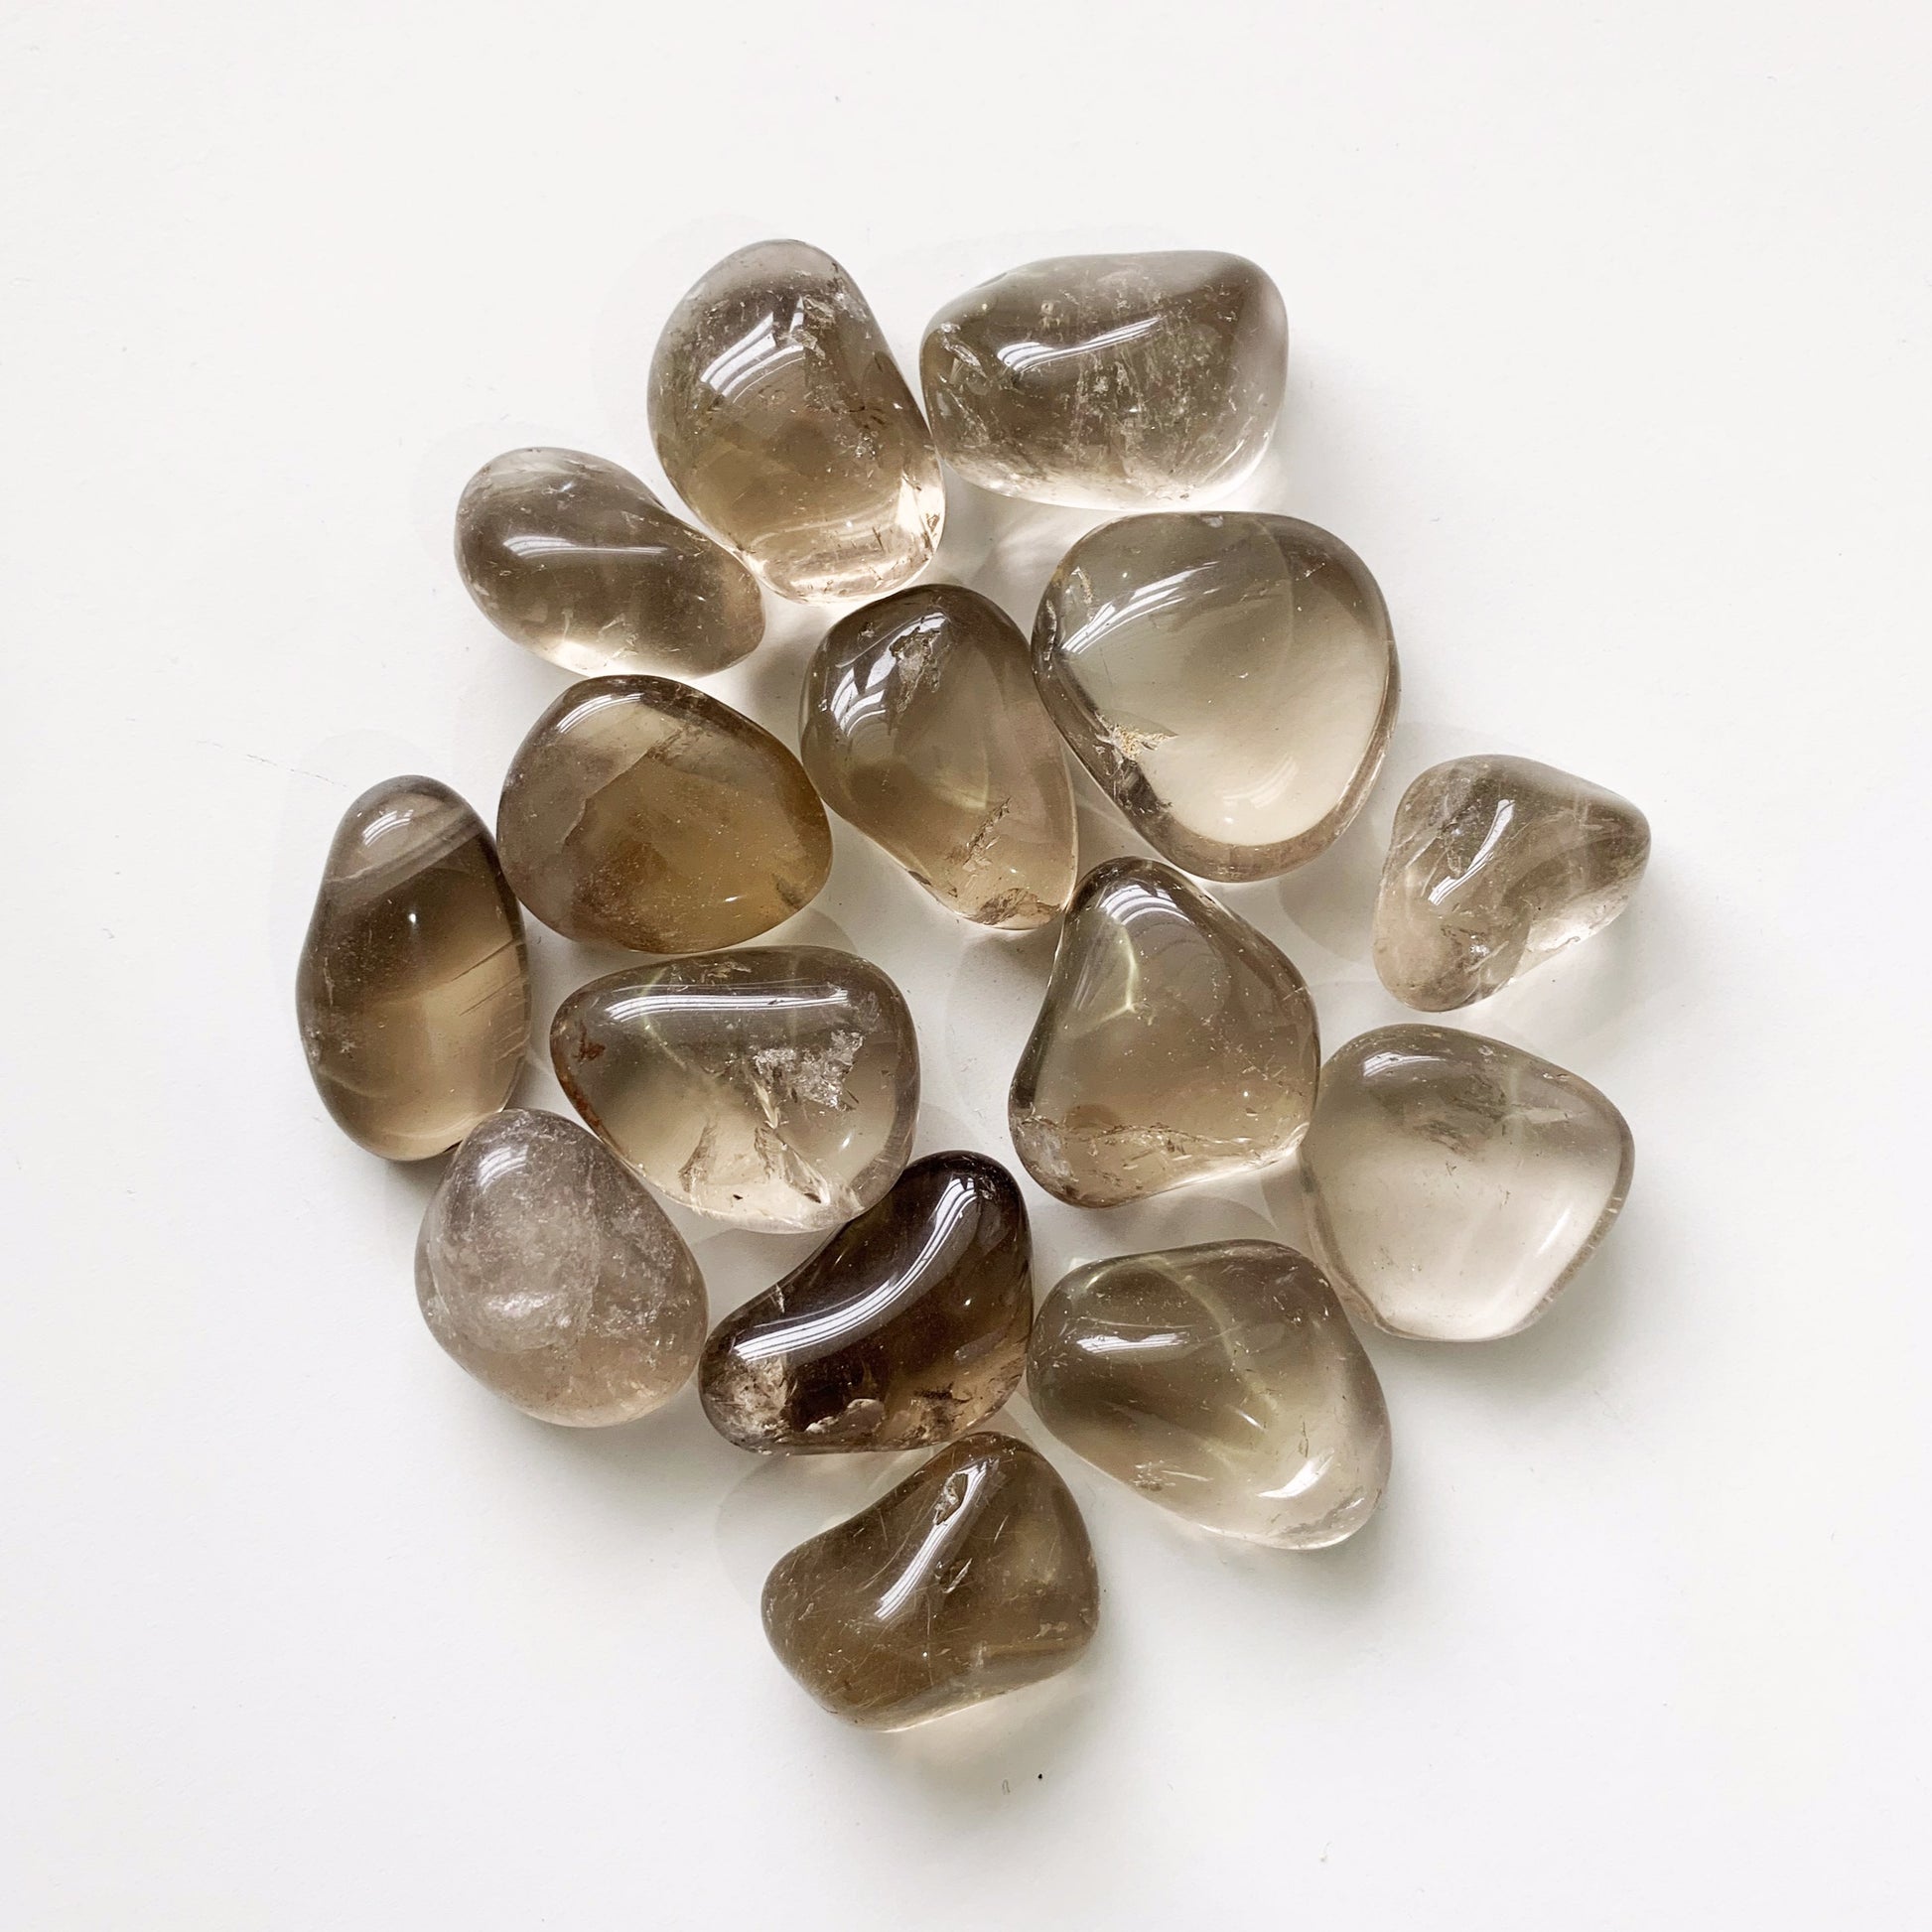 It gently neutralises negative vibrations and is detoxifying on all levels, prompting elimination of the digestive system and protecting against radiation and electromagnetic smog. Smokey Quartz disperses fear, lifts depression and negativity. It brings emotional calmness, relieving stress and anxiety.  Listing 1 stone.